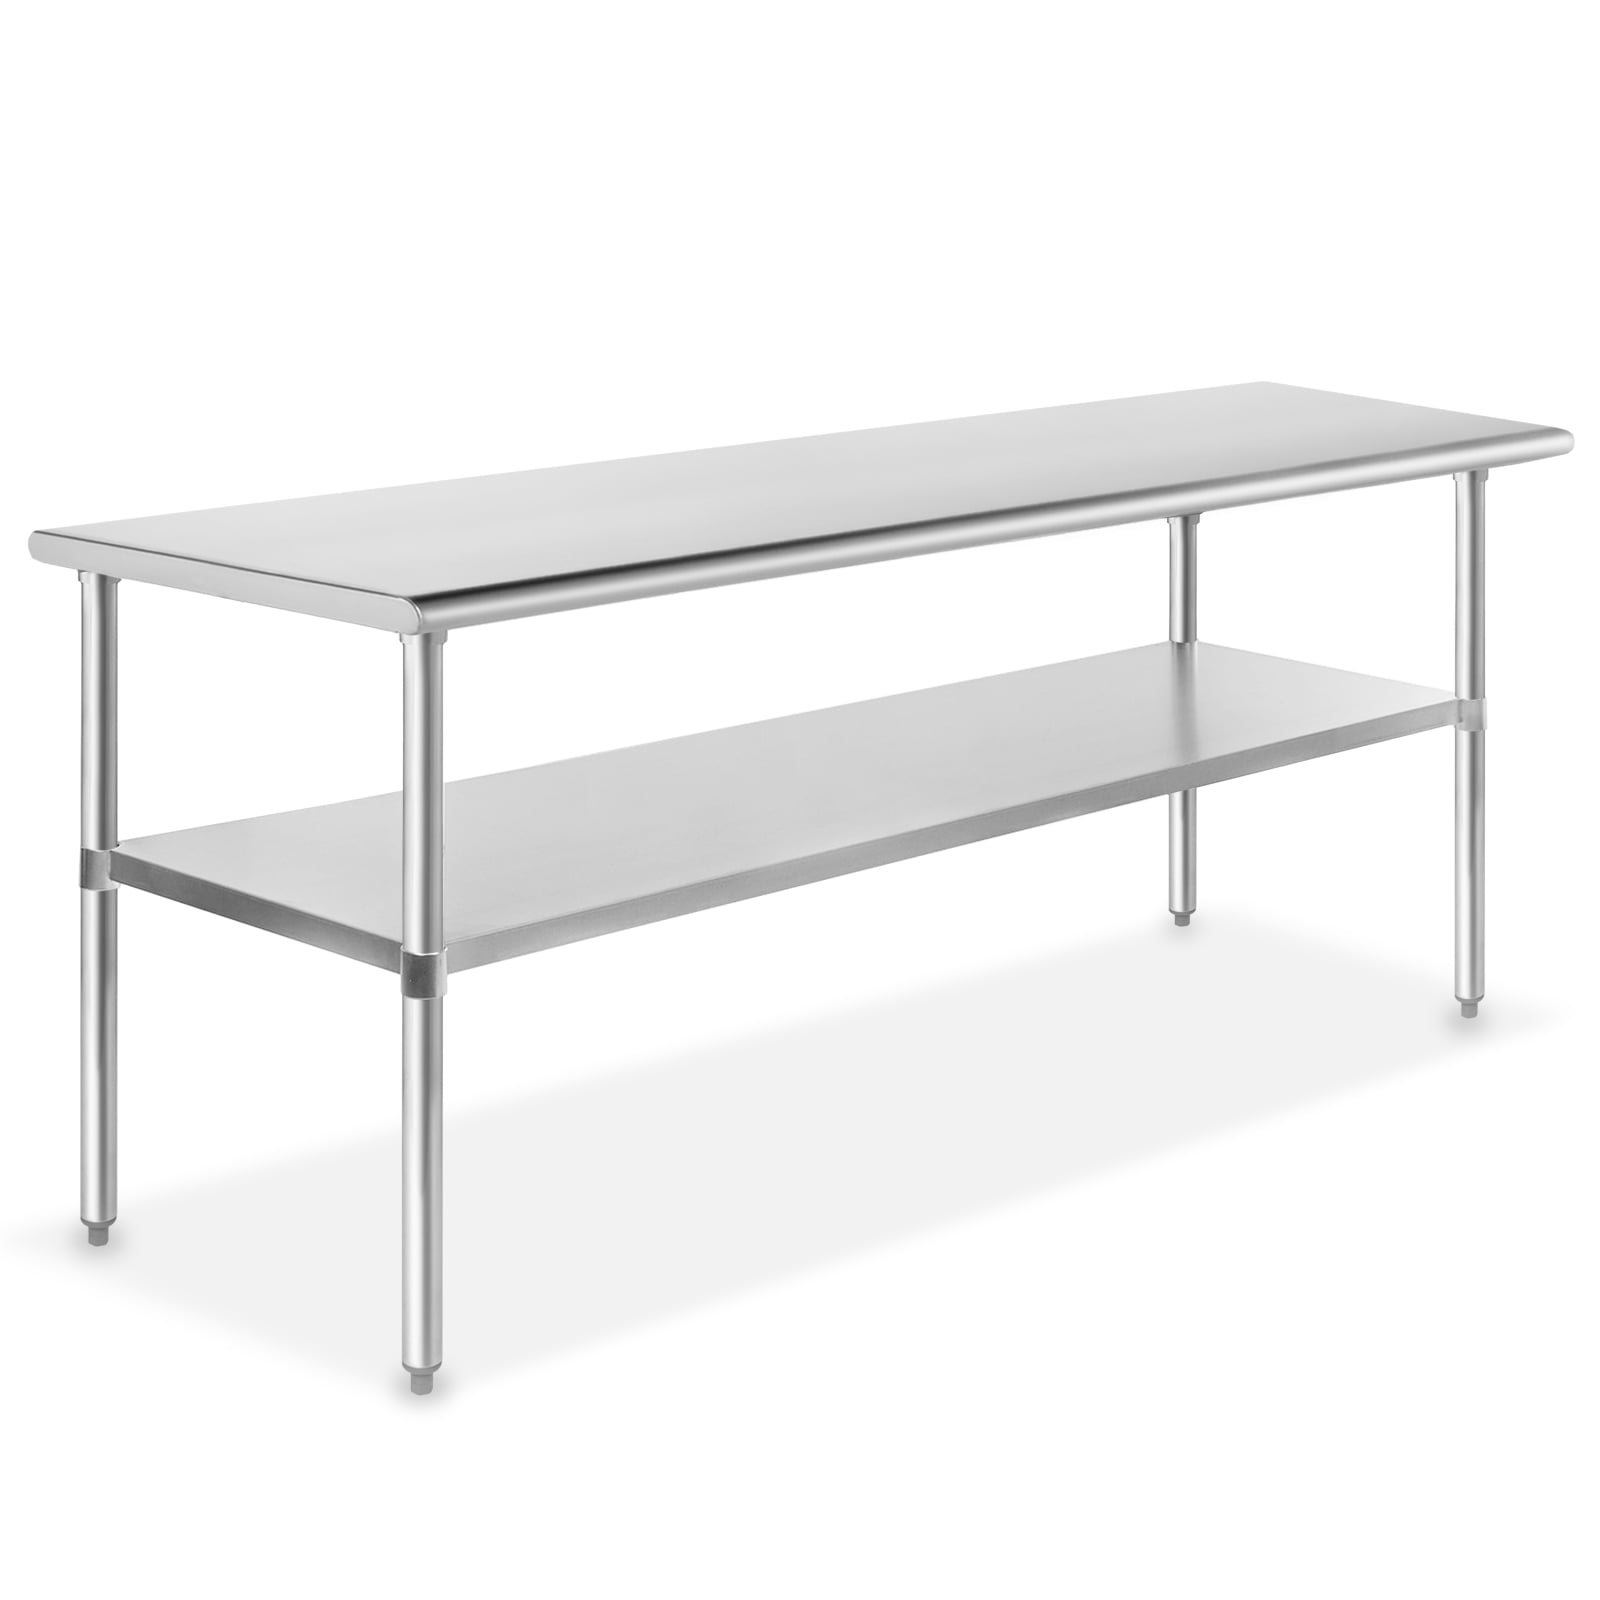 18 x 60 Stainless Steel NSF Commercial Kitchen Work Table with 4 Backsplash 